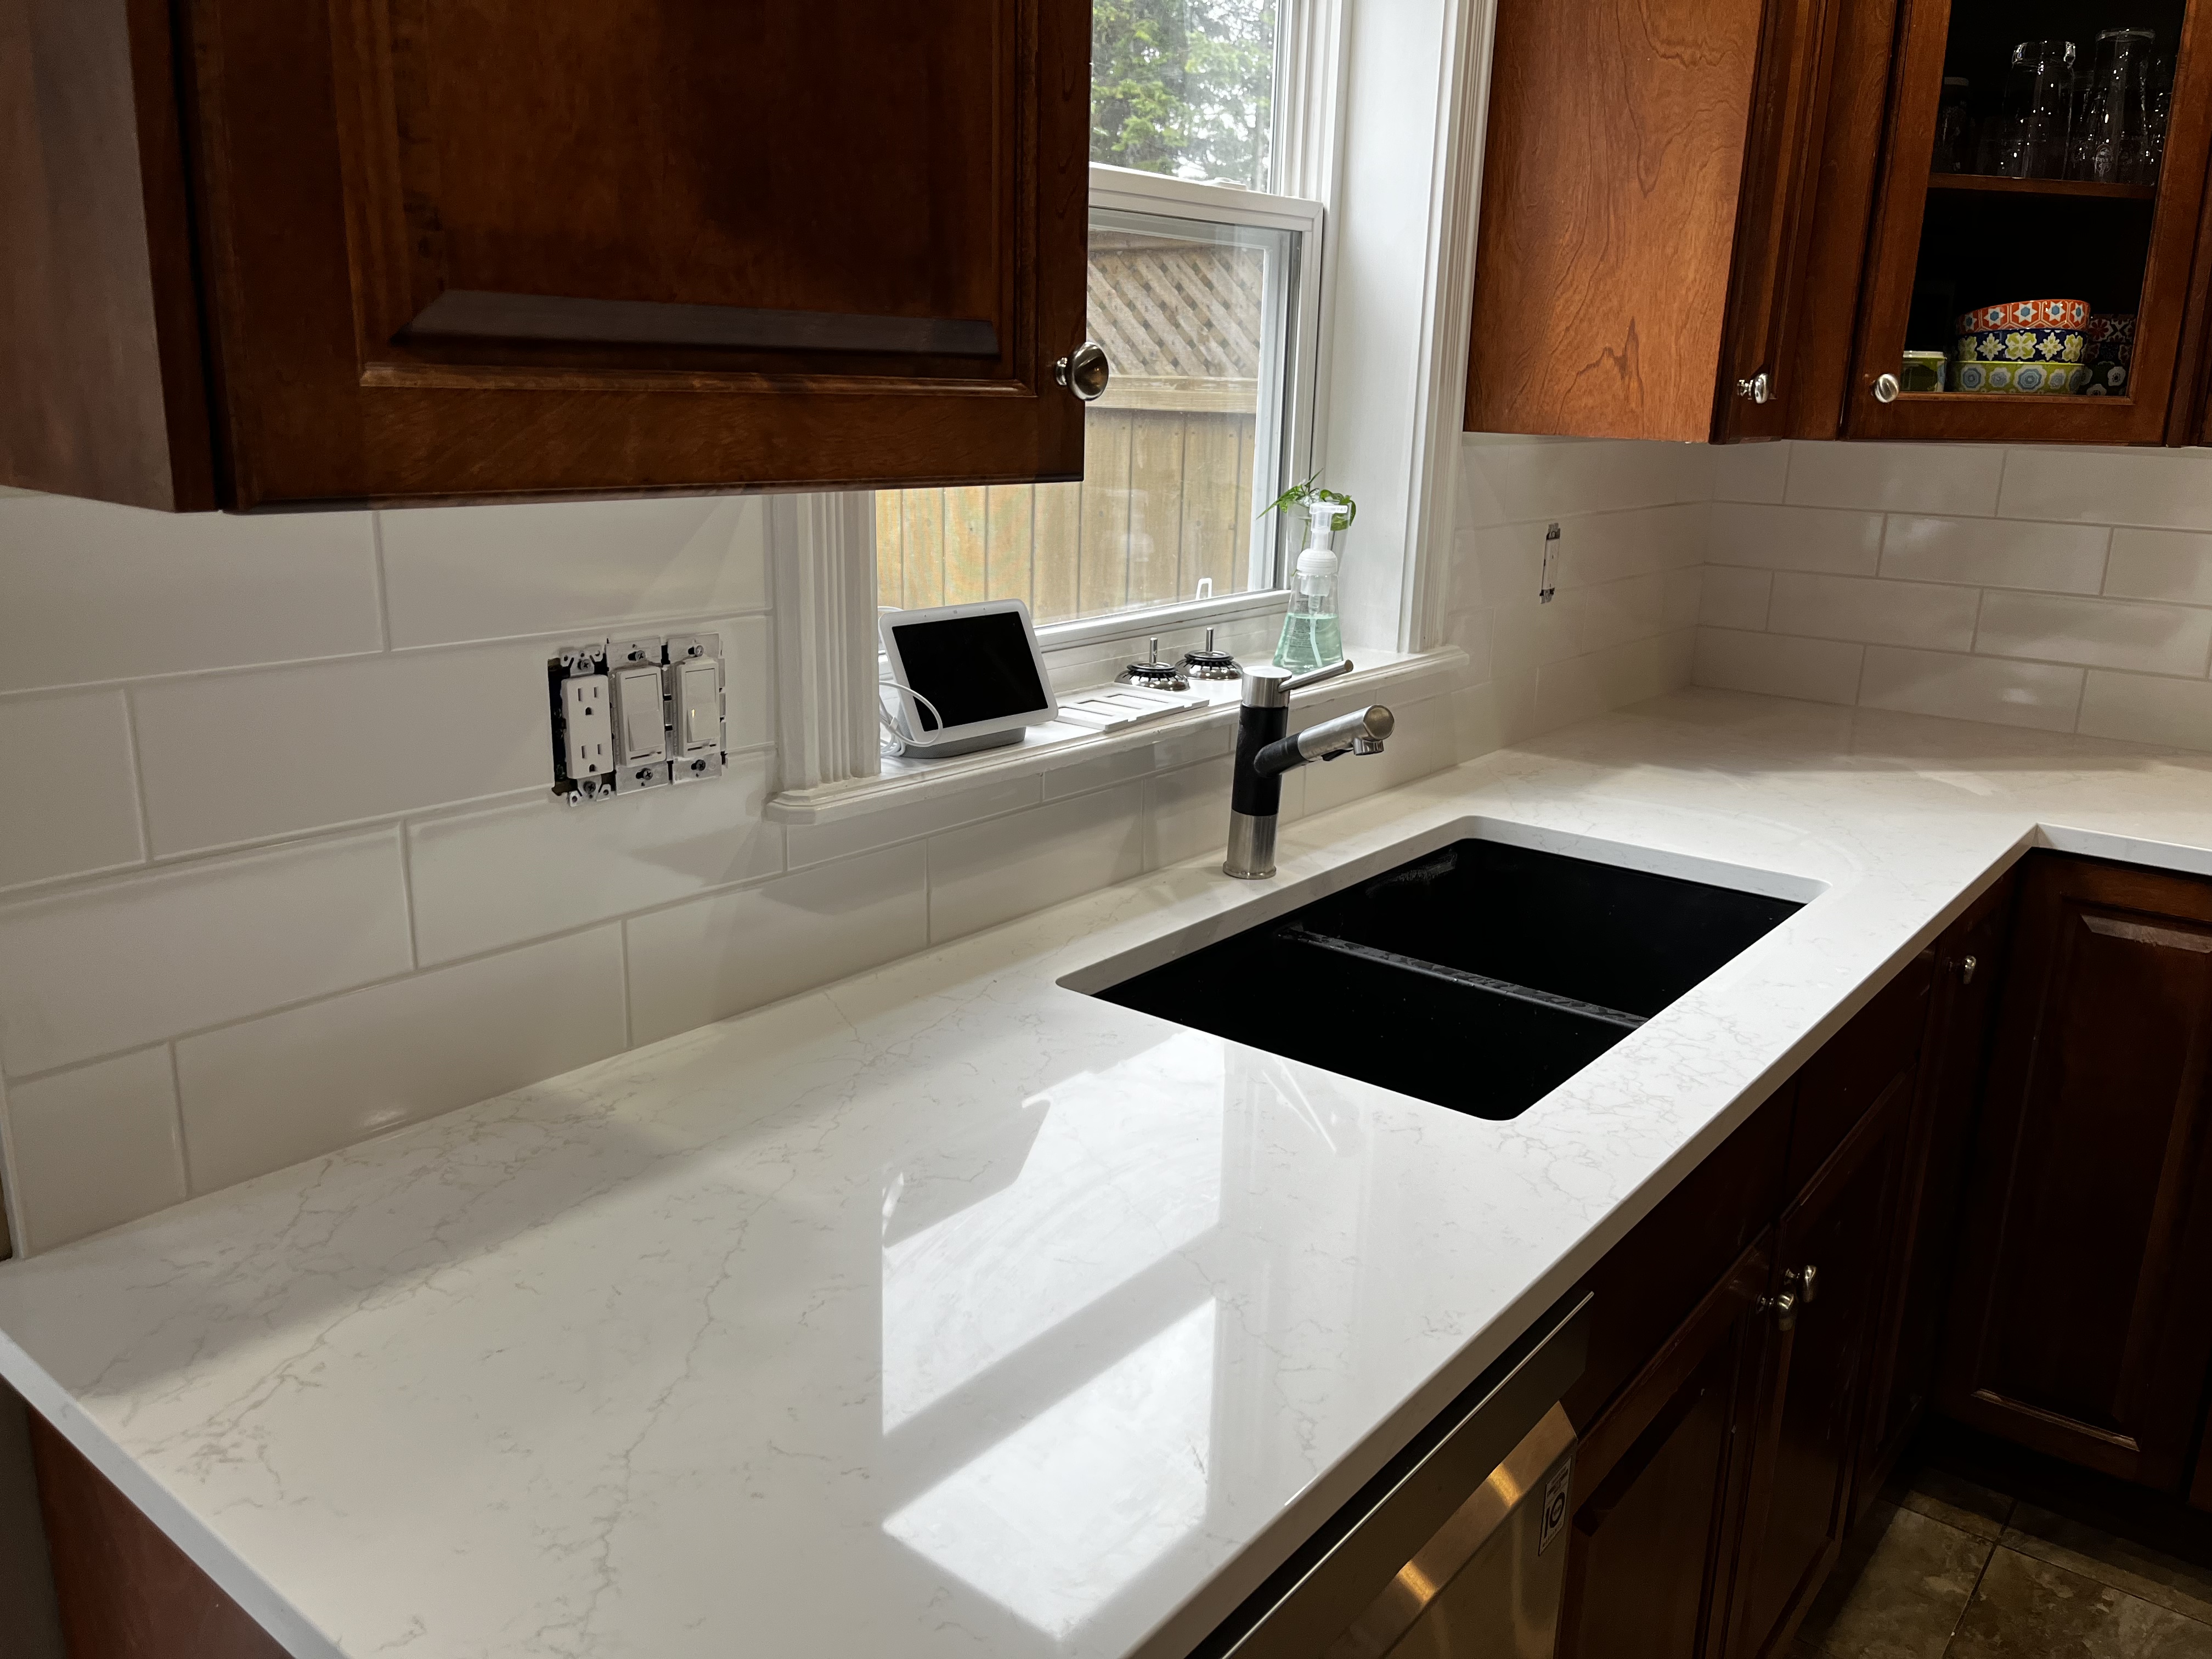 New Quartz counters with an undermount granite sink and tile backsplash